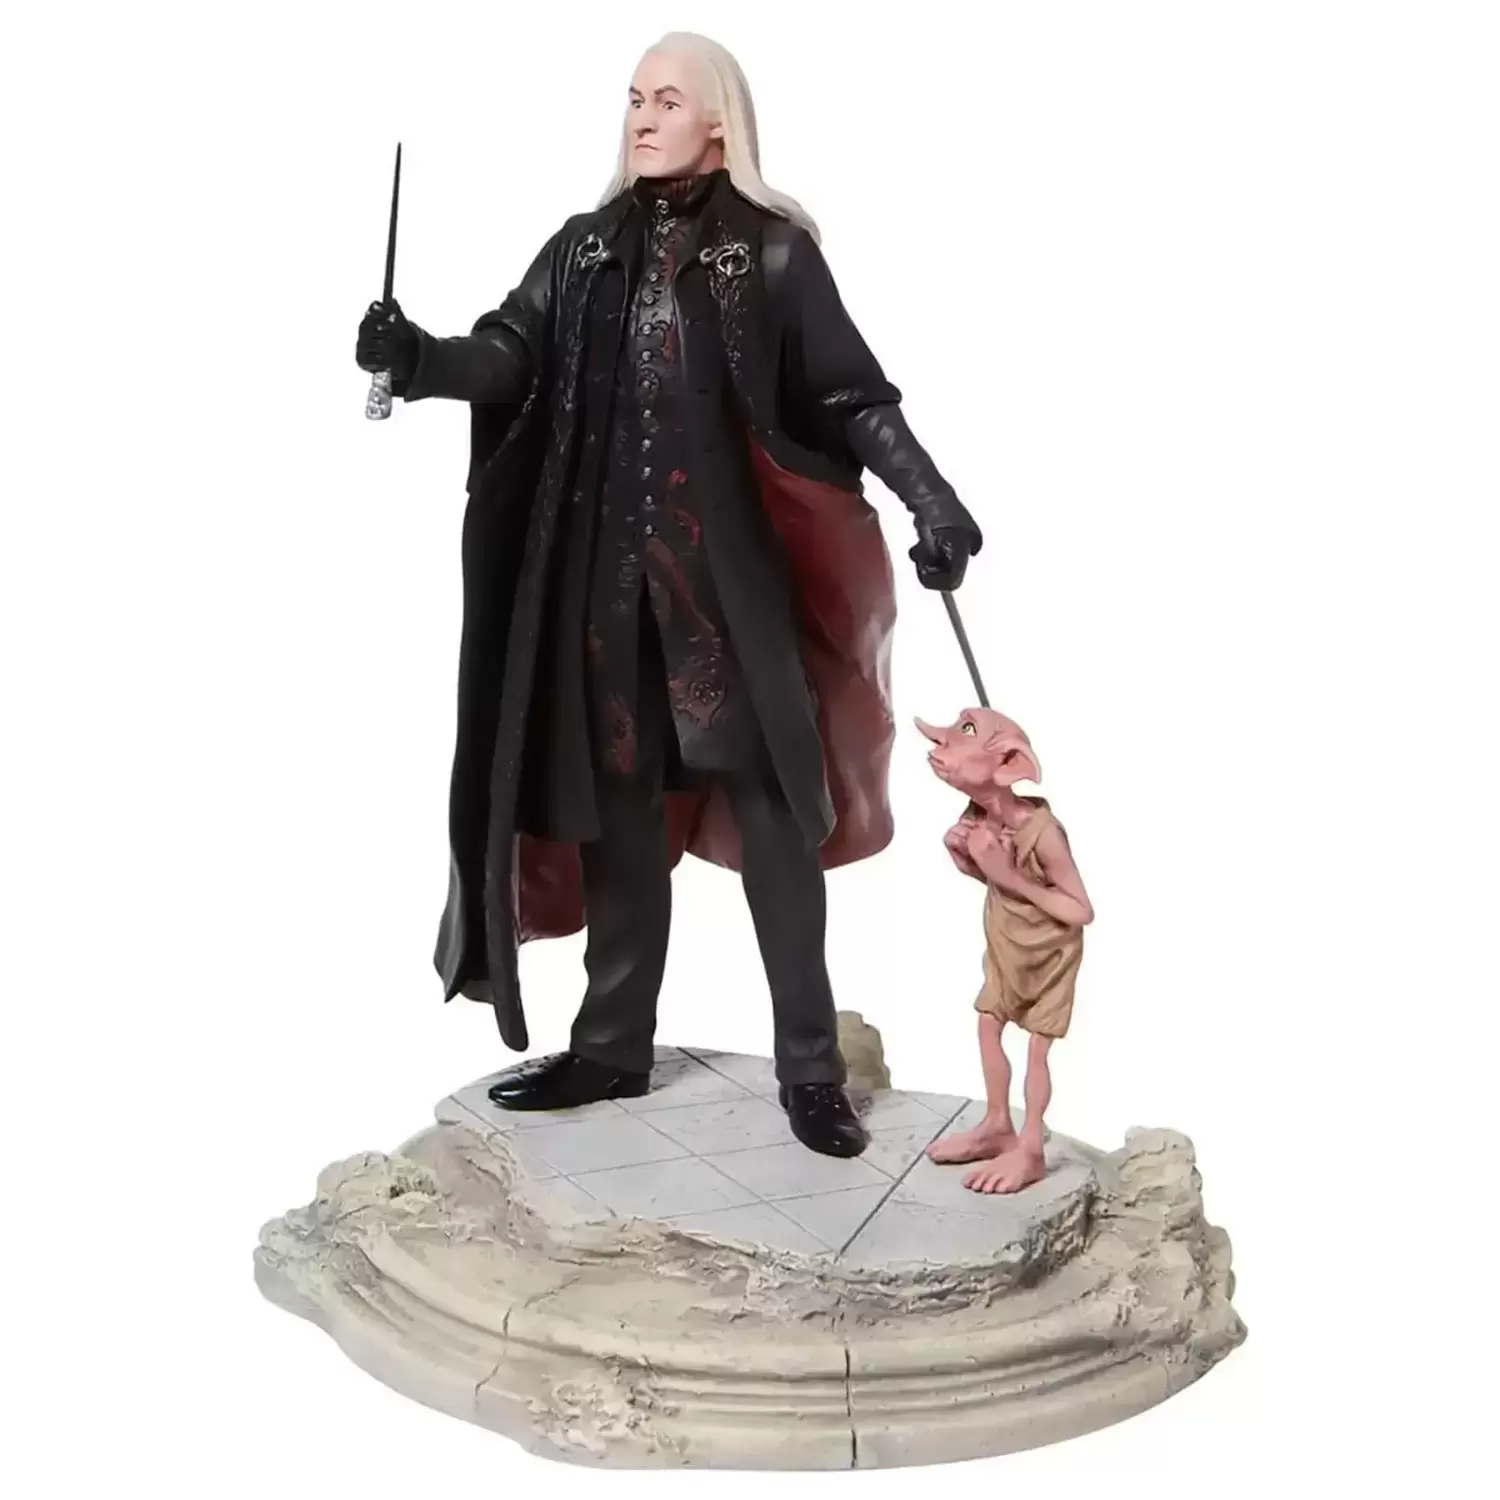 Wizarding World of Harry Potter (Enesco) - Lucious Malfoy with Dobby